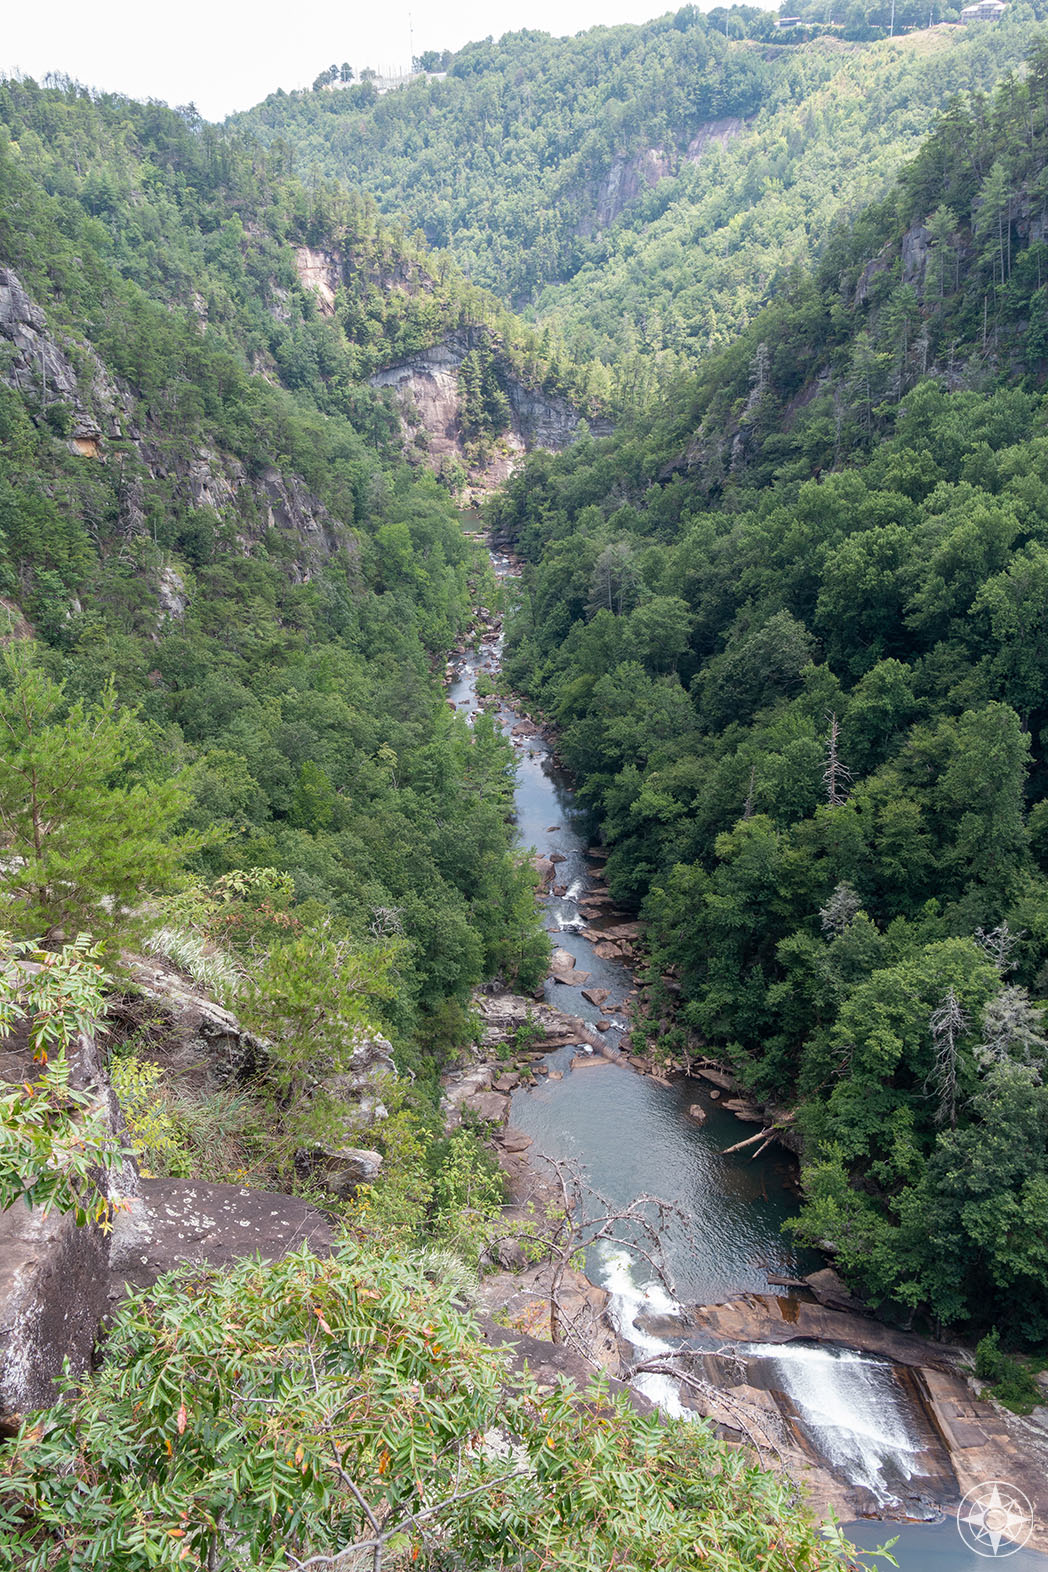 Oceana Falls and the Tallulah Gorge stretch before the Horseshoe Bend hides the river run